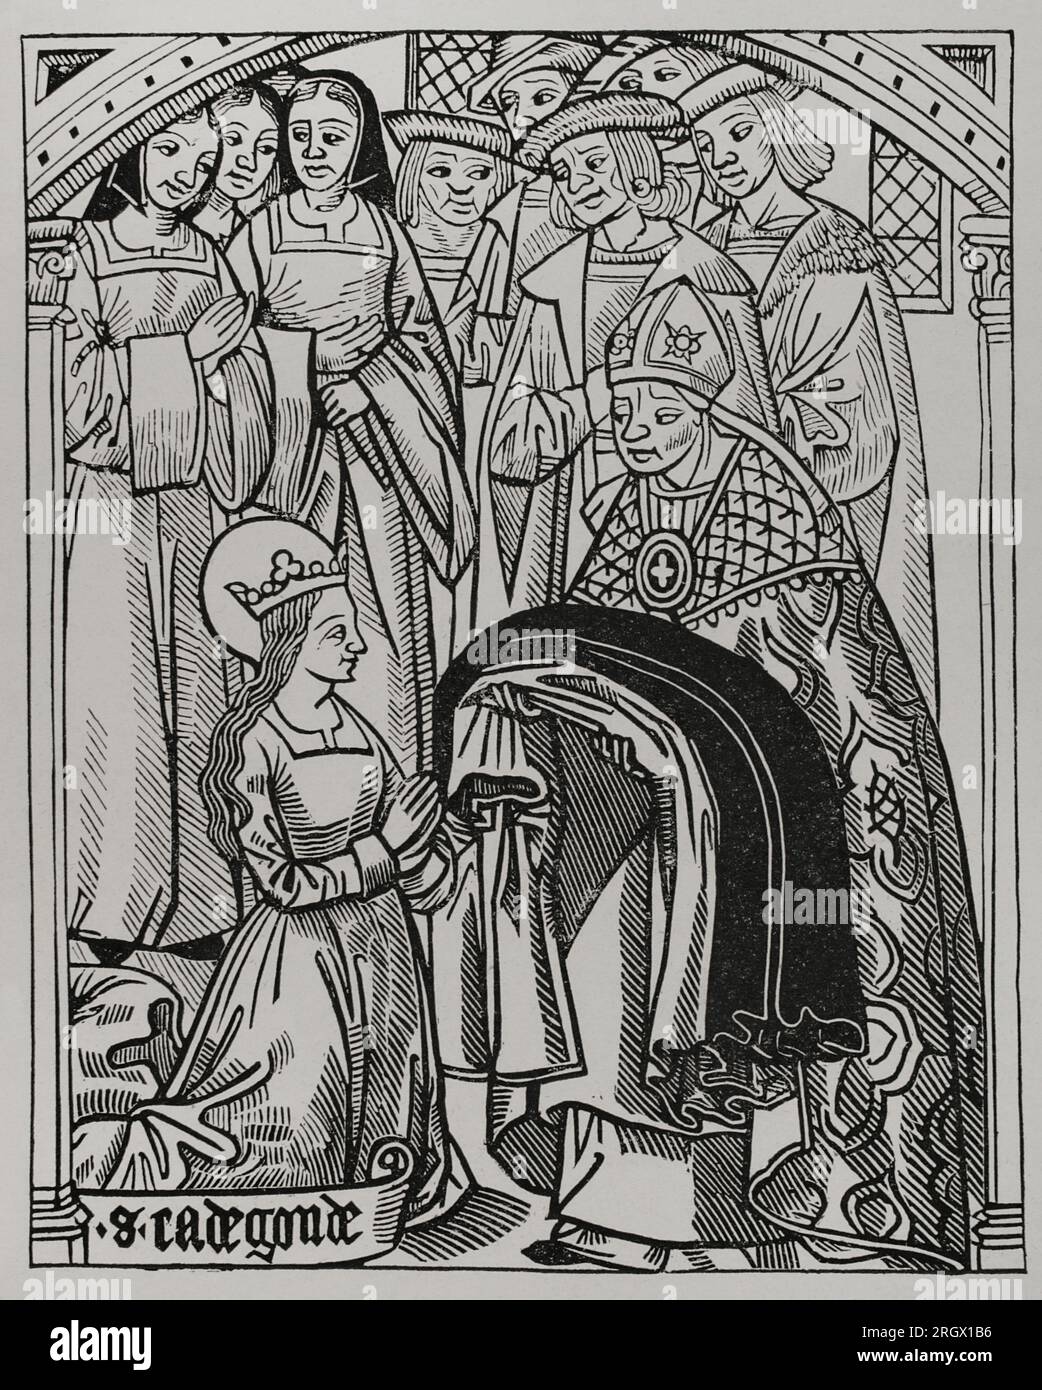 Saint Radegund (ca. 520-587). Princess of Thuringia and queen of the Franks by her marriage to Clothar I (498-561). Radegund receiving the habit and being consecrated a deaconess by Medard (456-545), bishop of Noyon, when she left her husband King Clothar in order to enter the religious life. Facsimile after an engraving from 'The History and Chronicle of Clotaire', 1513. 'Vie Militaire et Religieuse au Moyen Age et à l'Epoque de la Renaissance'. Paris, 1877. Stock Photo